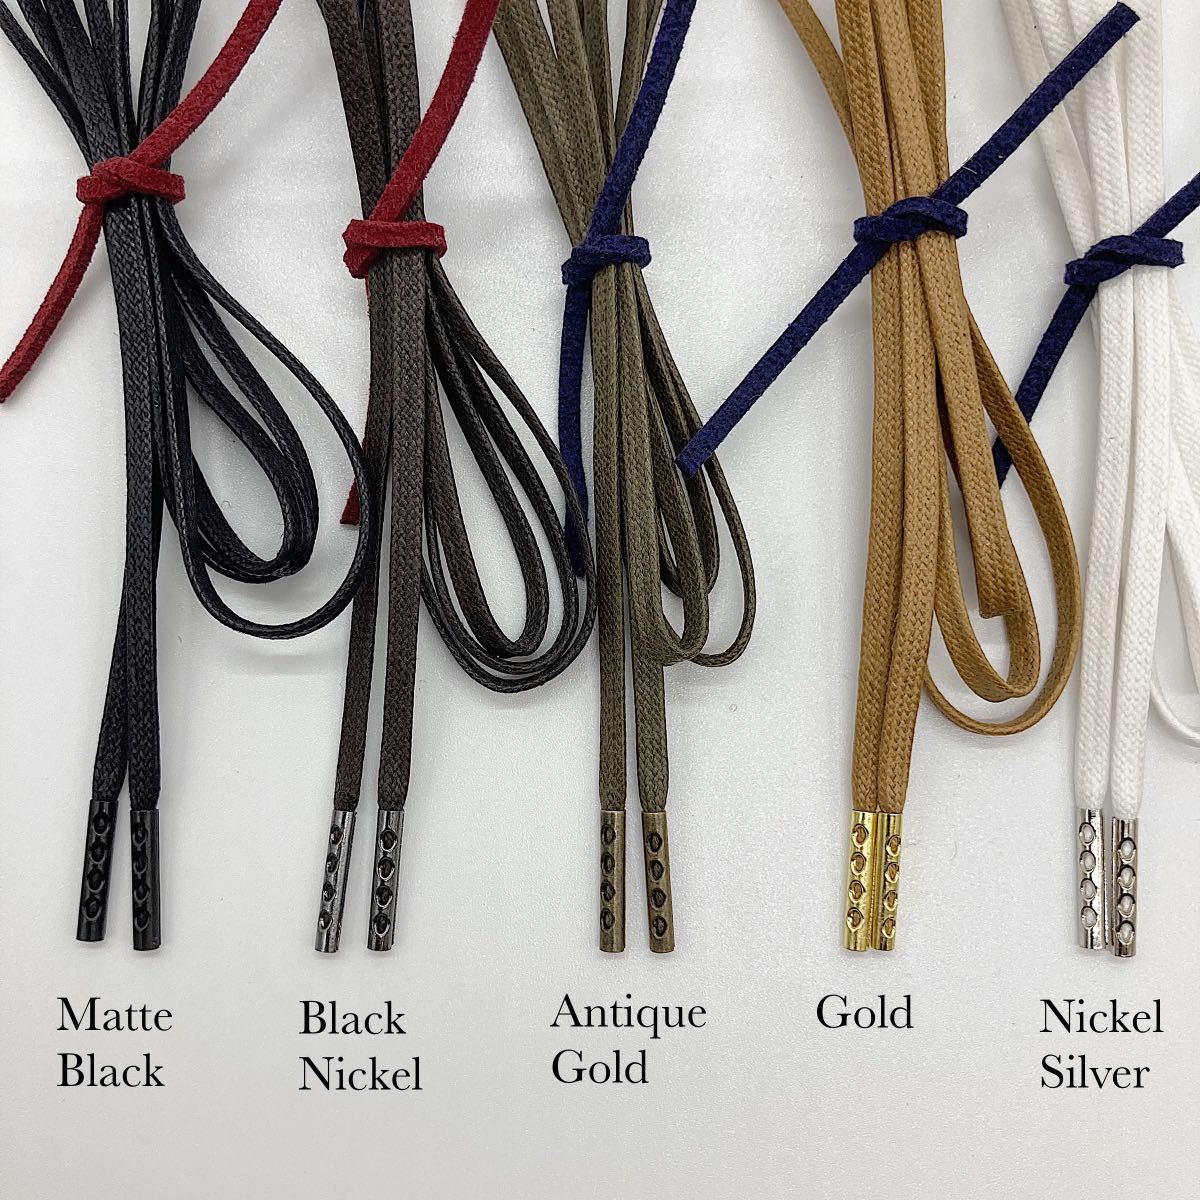 [Shoelace LABO]Waxed Cotton Round Laces 2.5mm/ low discount circle cord 2.5mm/121cm~200cm/ shoes cord leather shoes shoe race order boots 